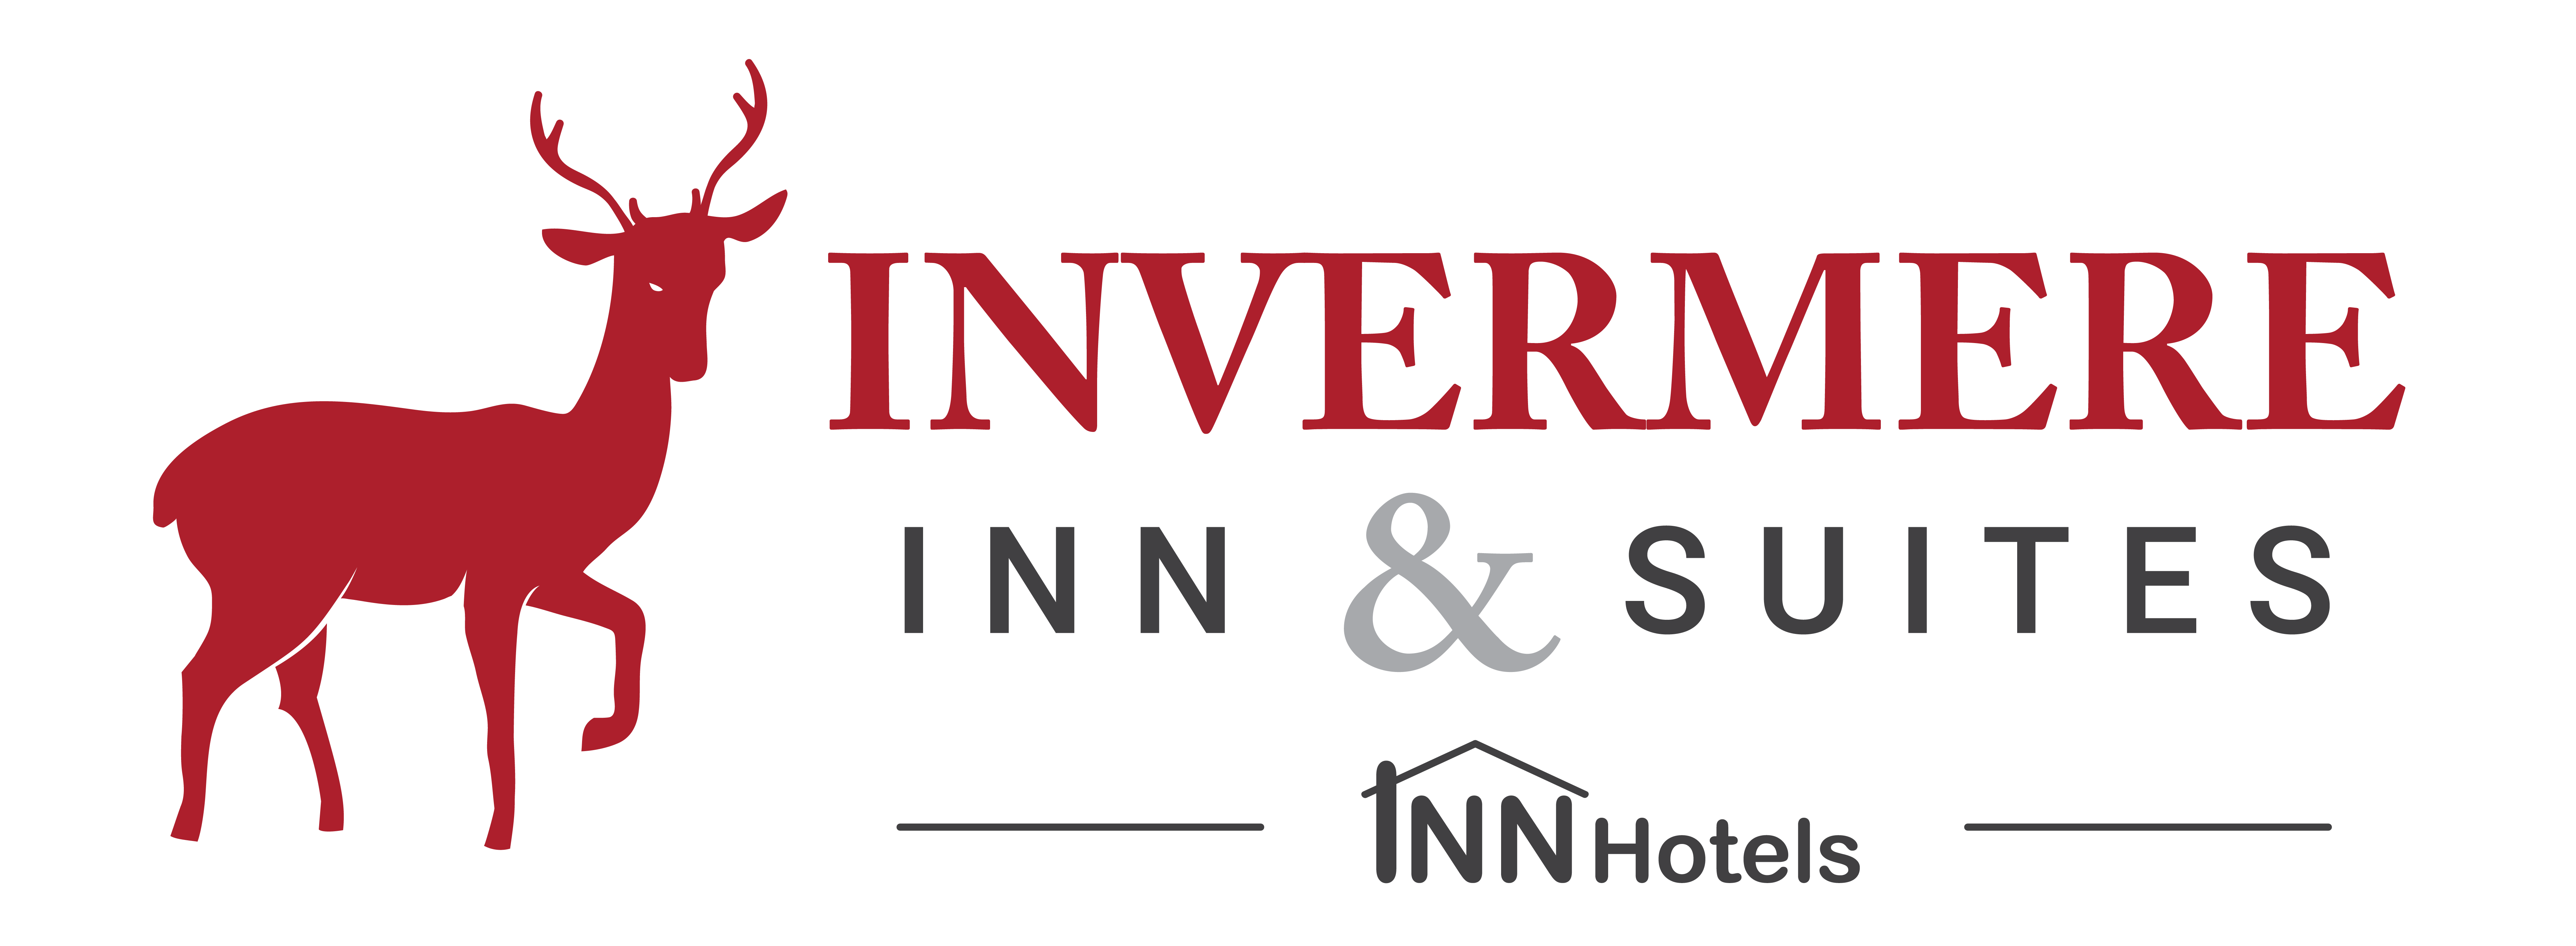 Invermere Inn and Suites